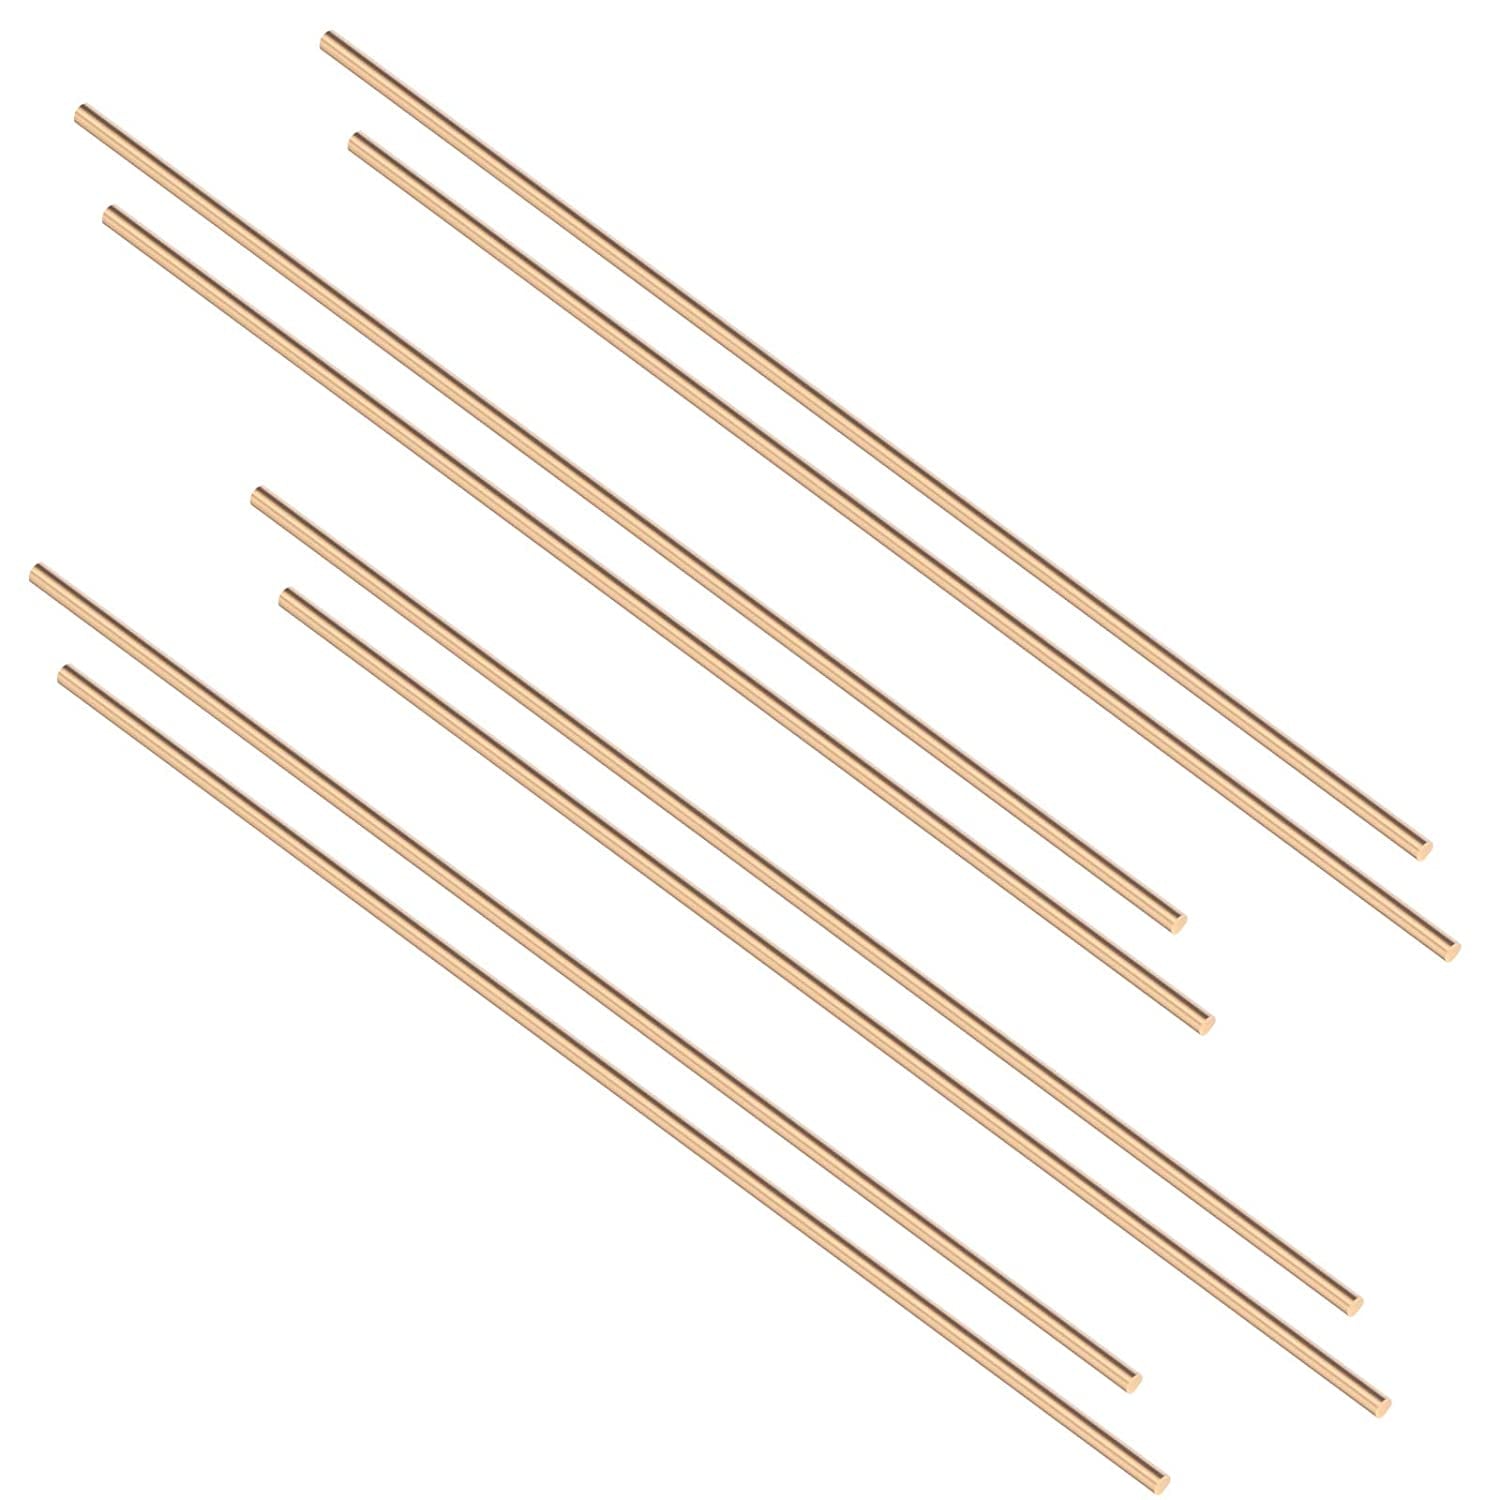 Eowpower 8Pcs Brass Solid round Rods Lathe Bar Stock Kit, 1/8 Inch in Diameter 14 Inches in Length